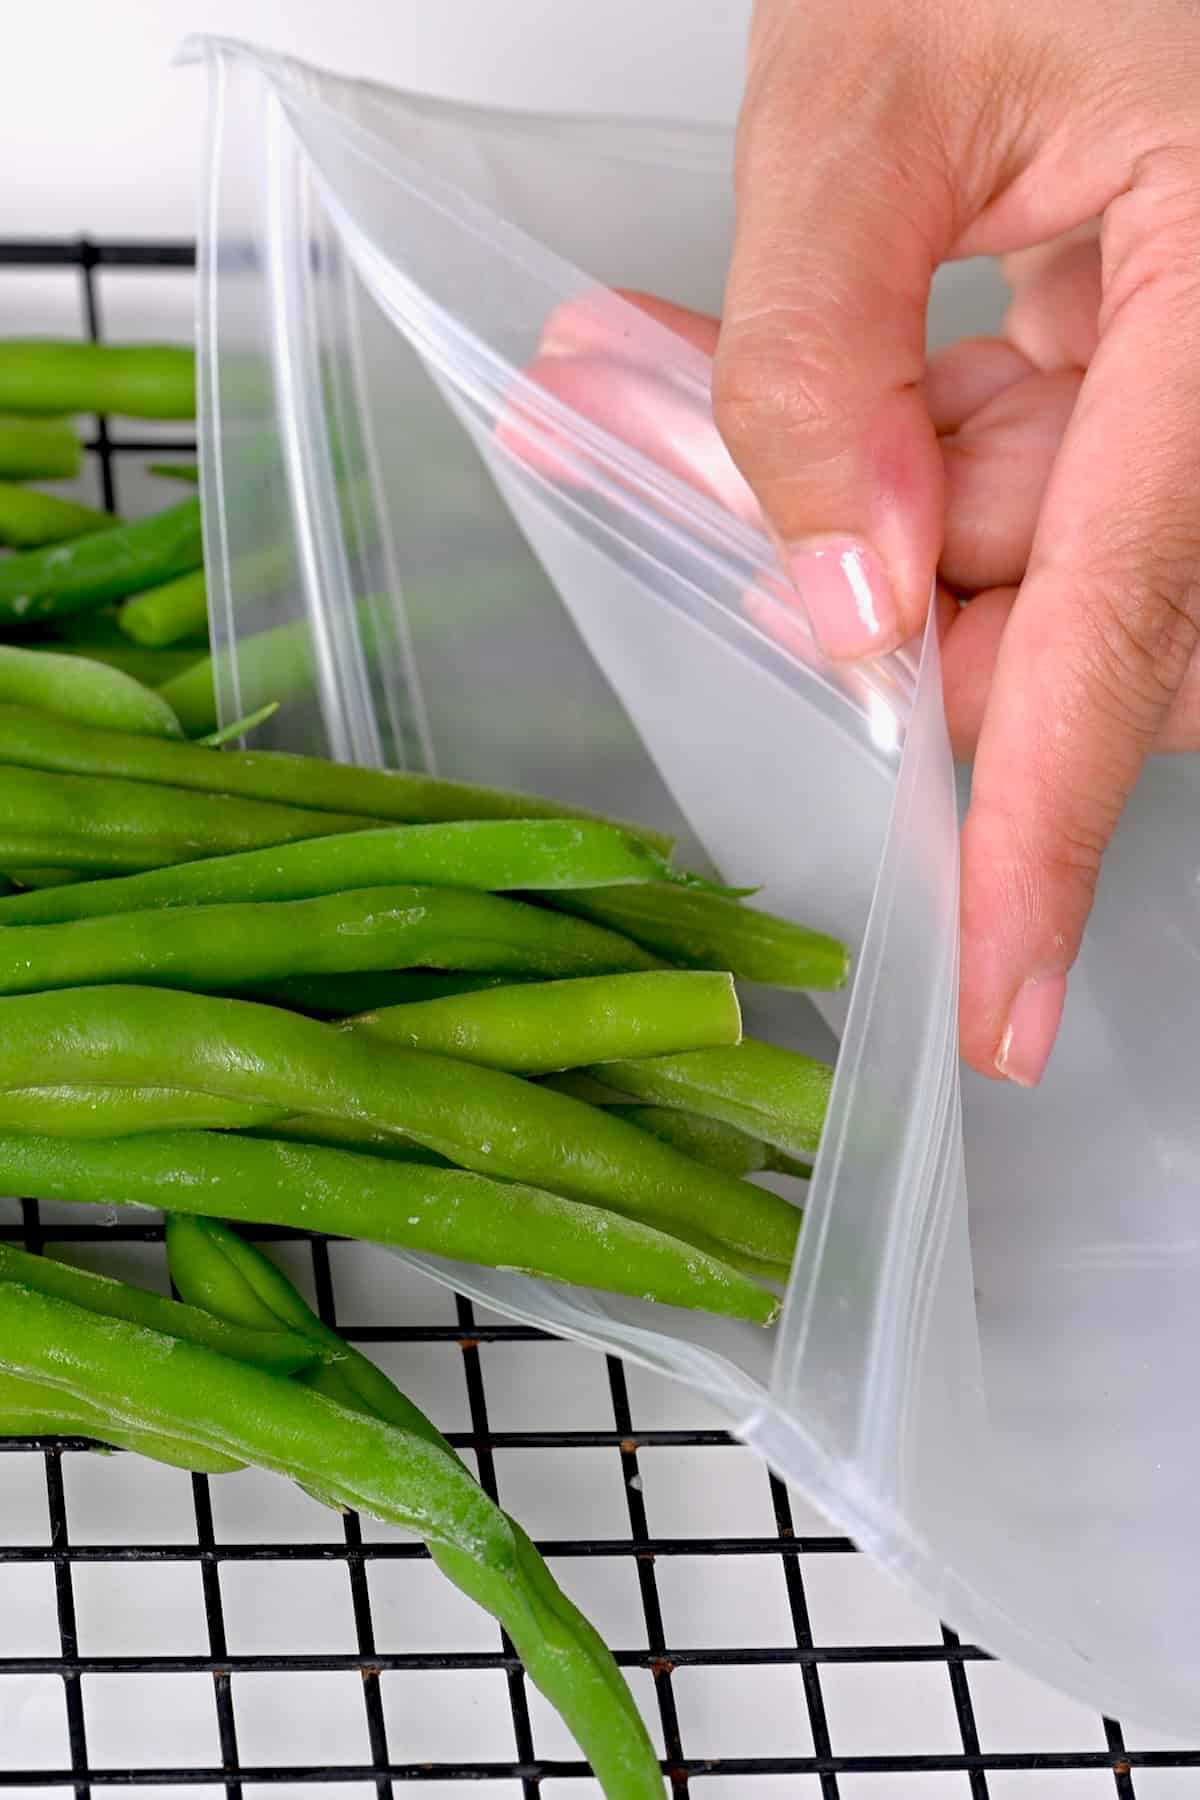 Placing green beans in a freezer bag